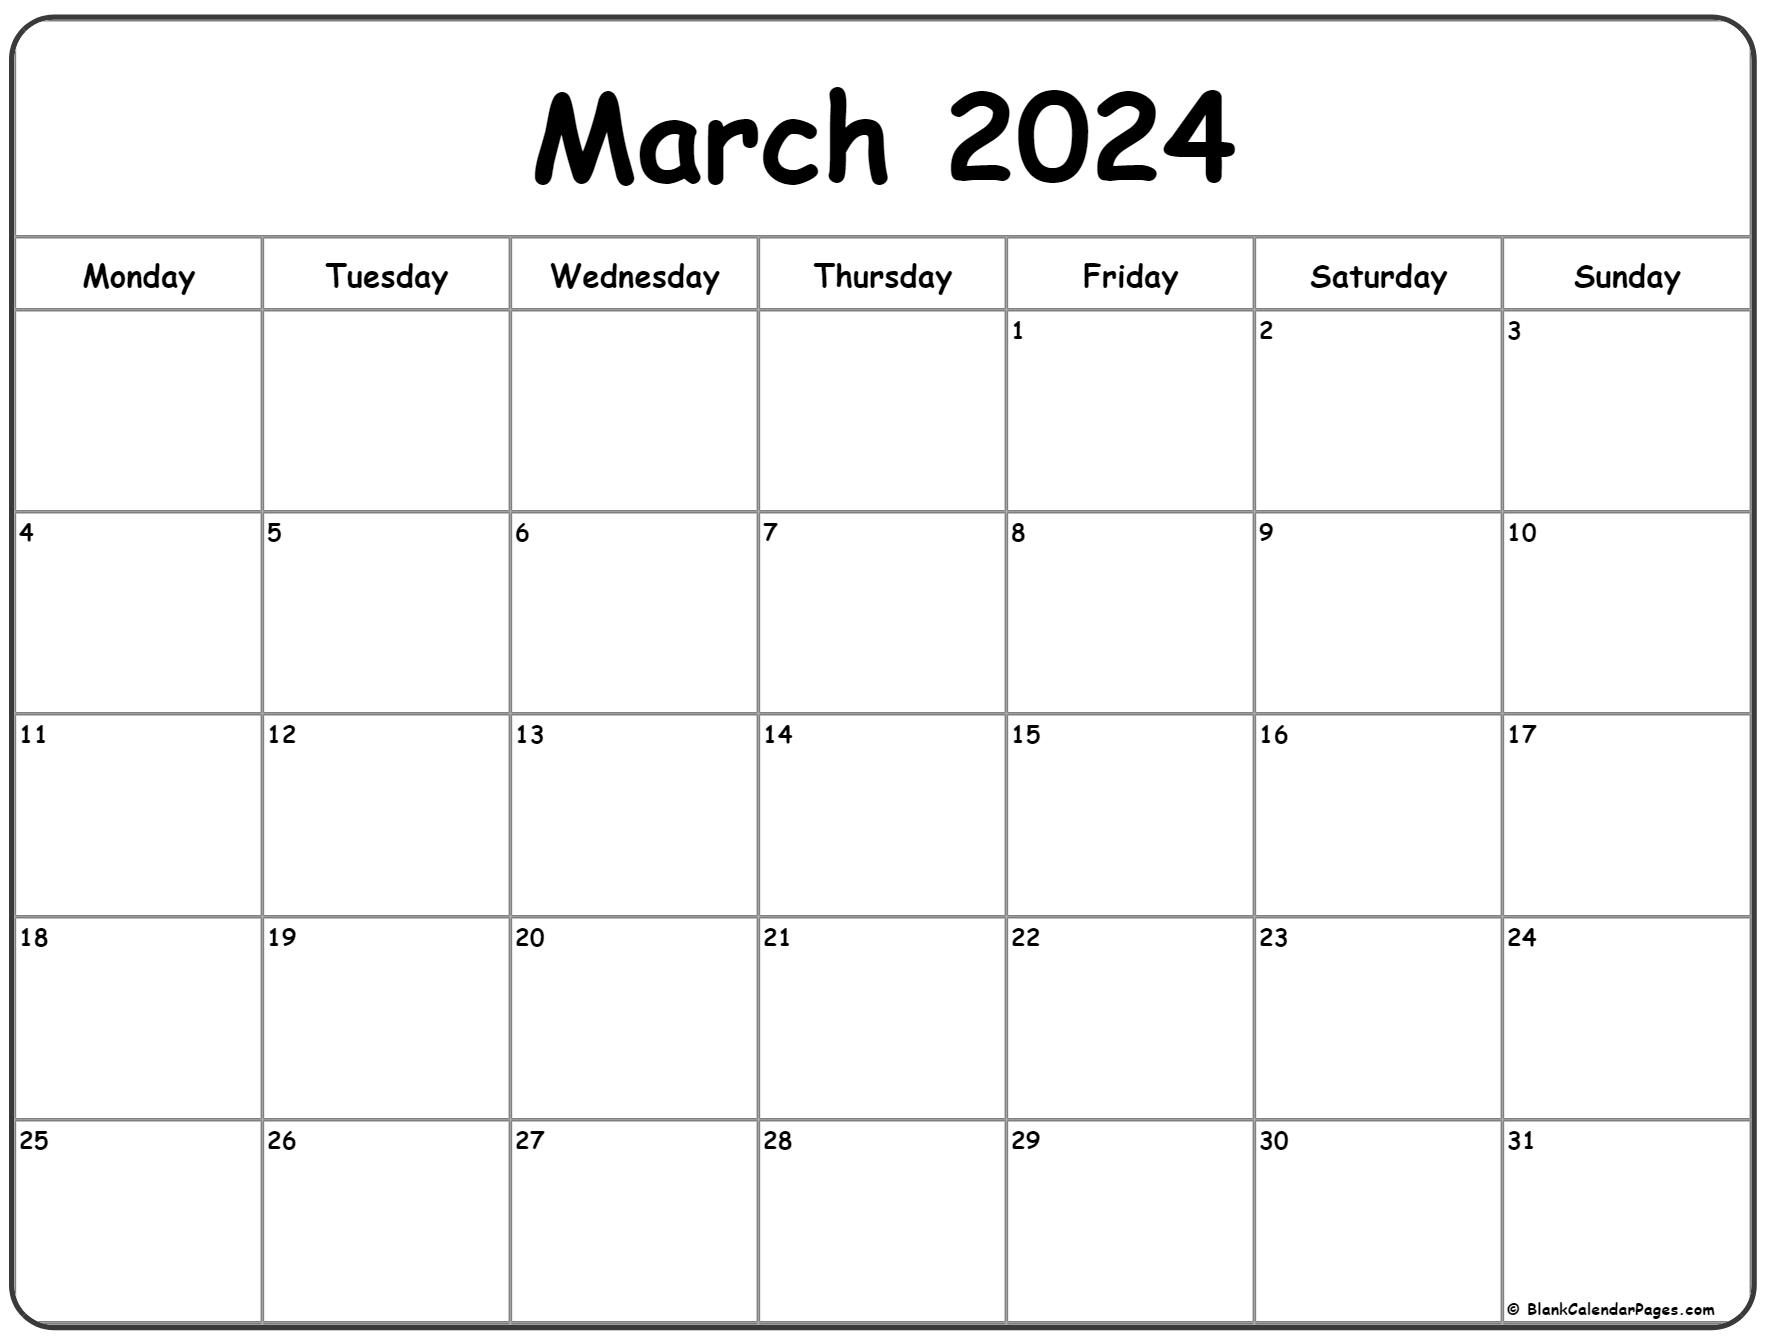 March 2024 Monday Calendar | Monday To Sunday for Printable March 2024 Calendar Page